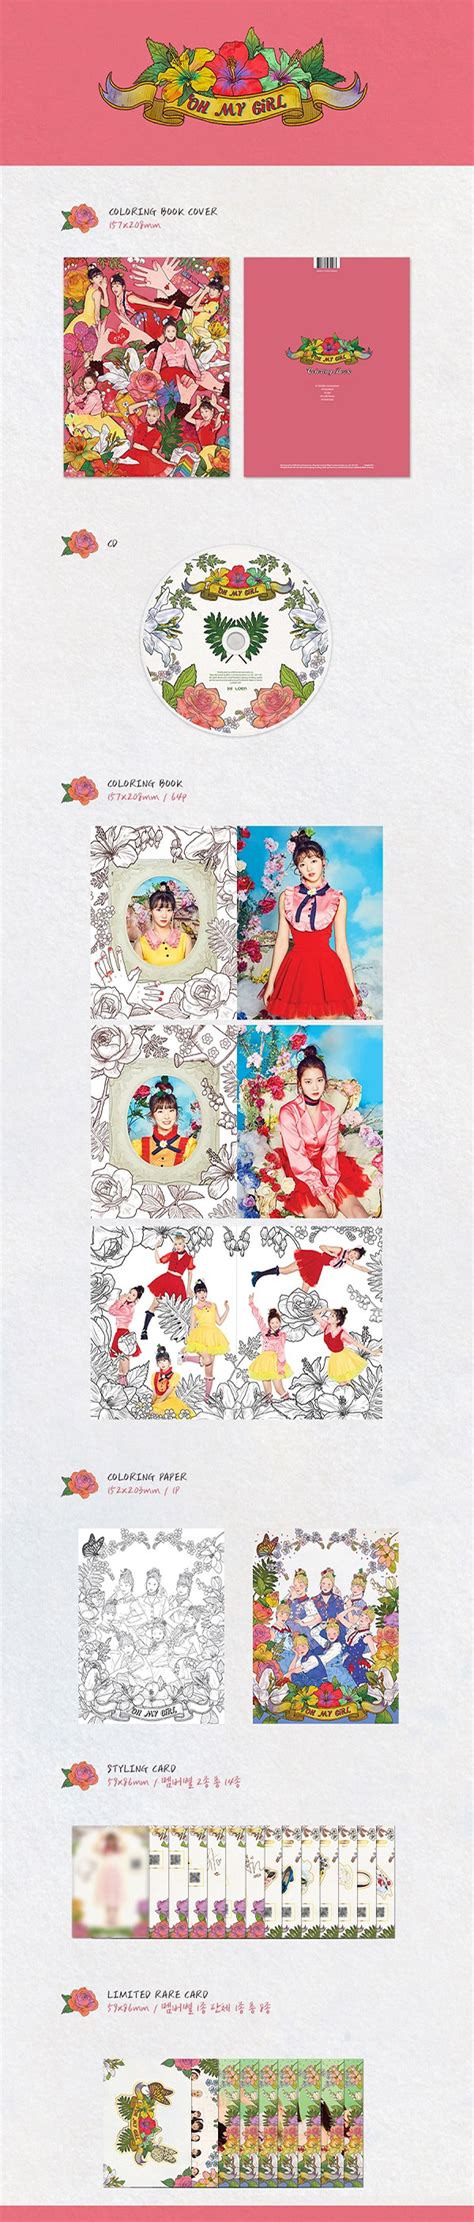 Re Release Oh My Girl 4th Mini Album Coloring Book Cd